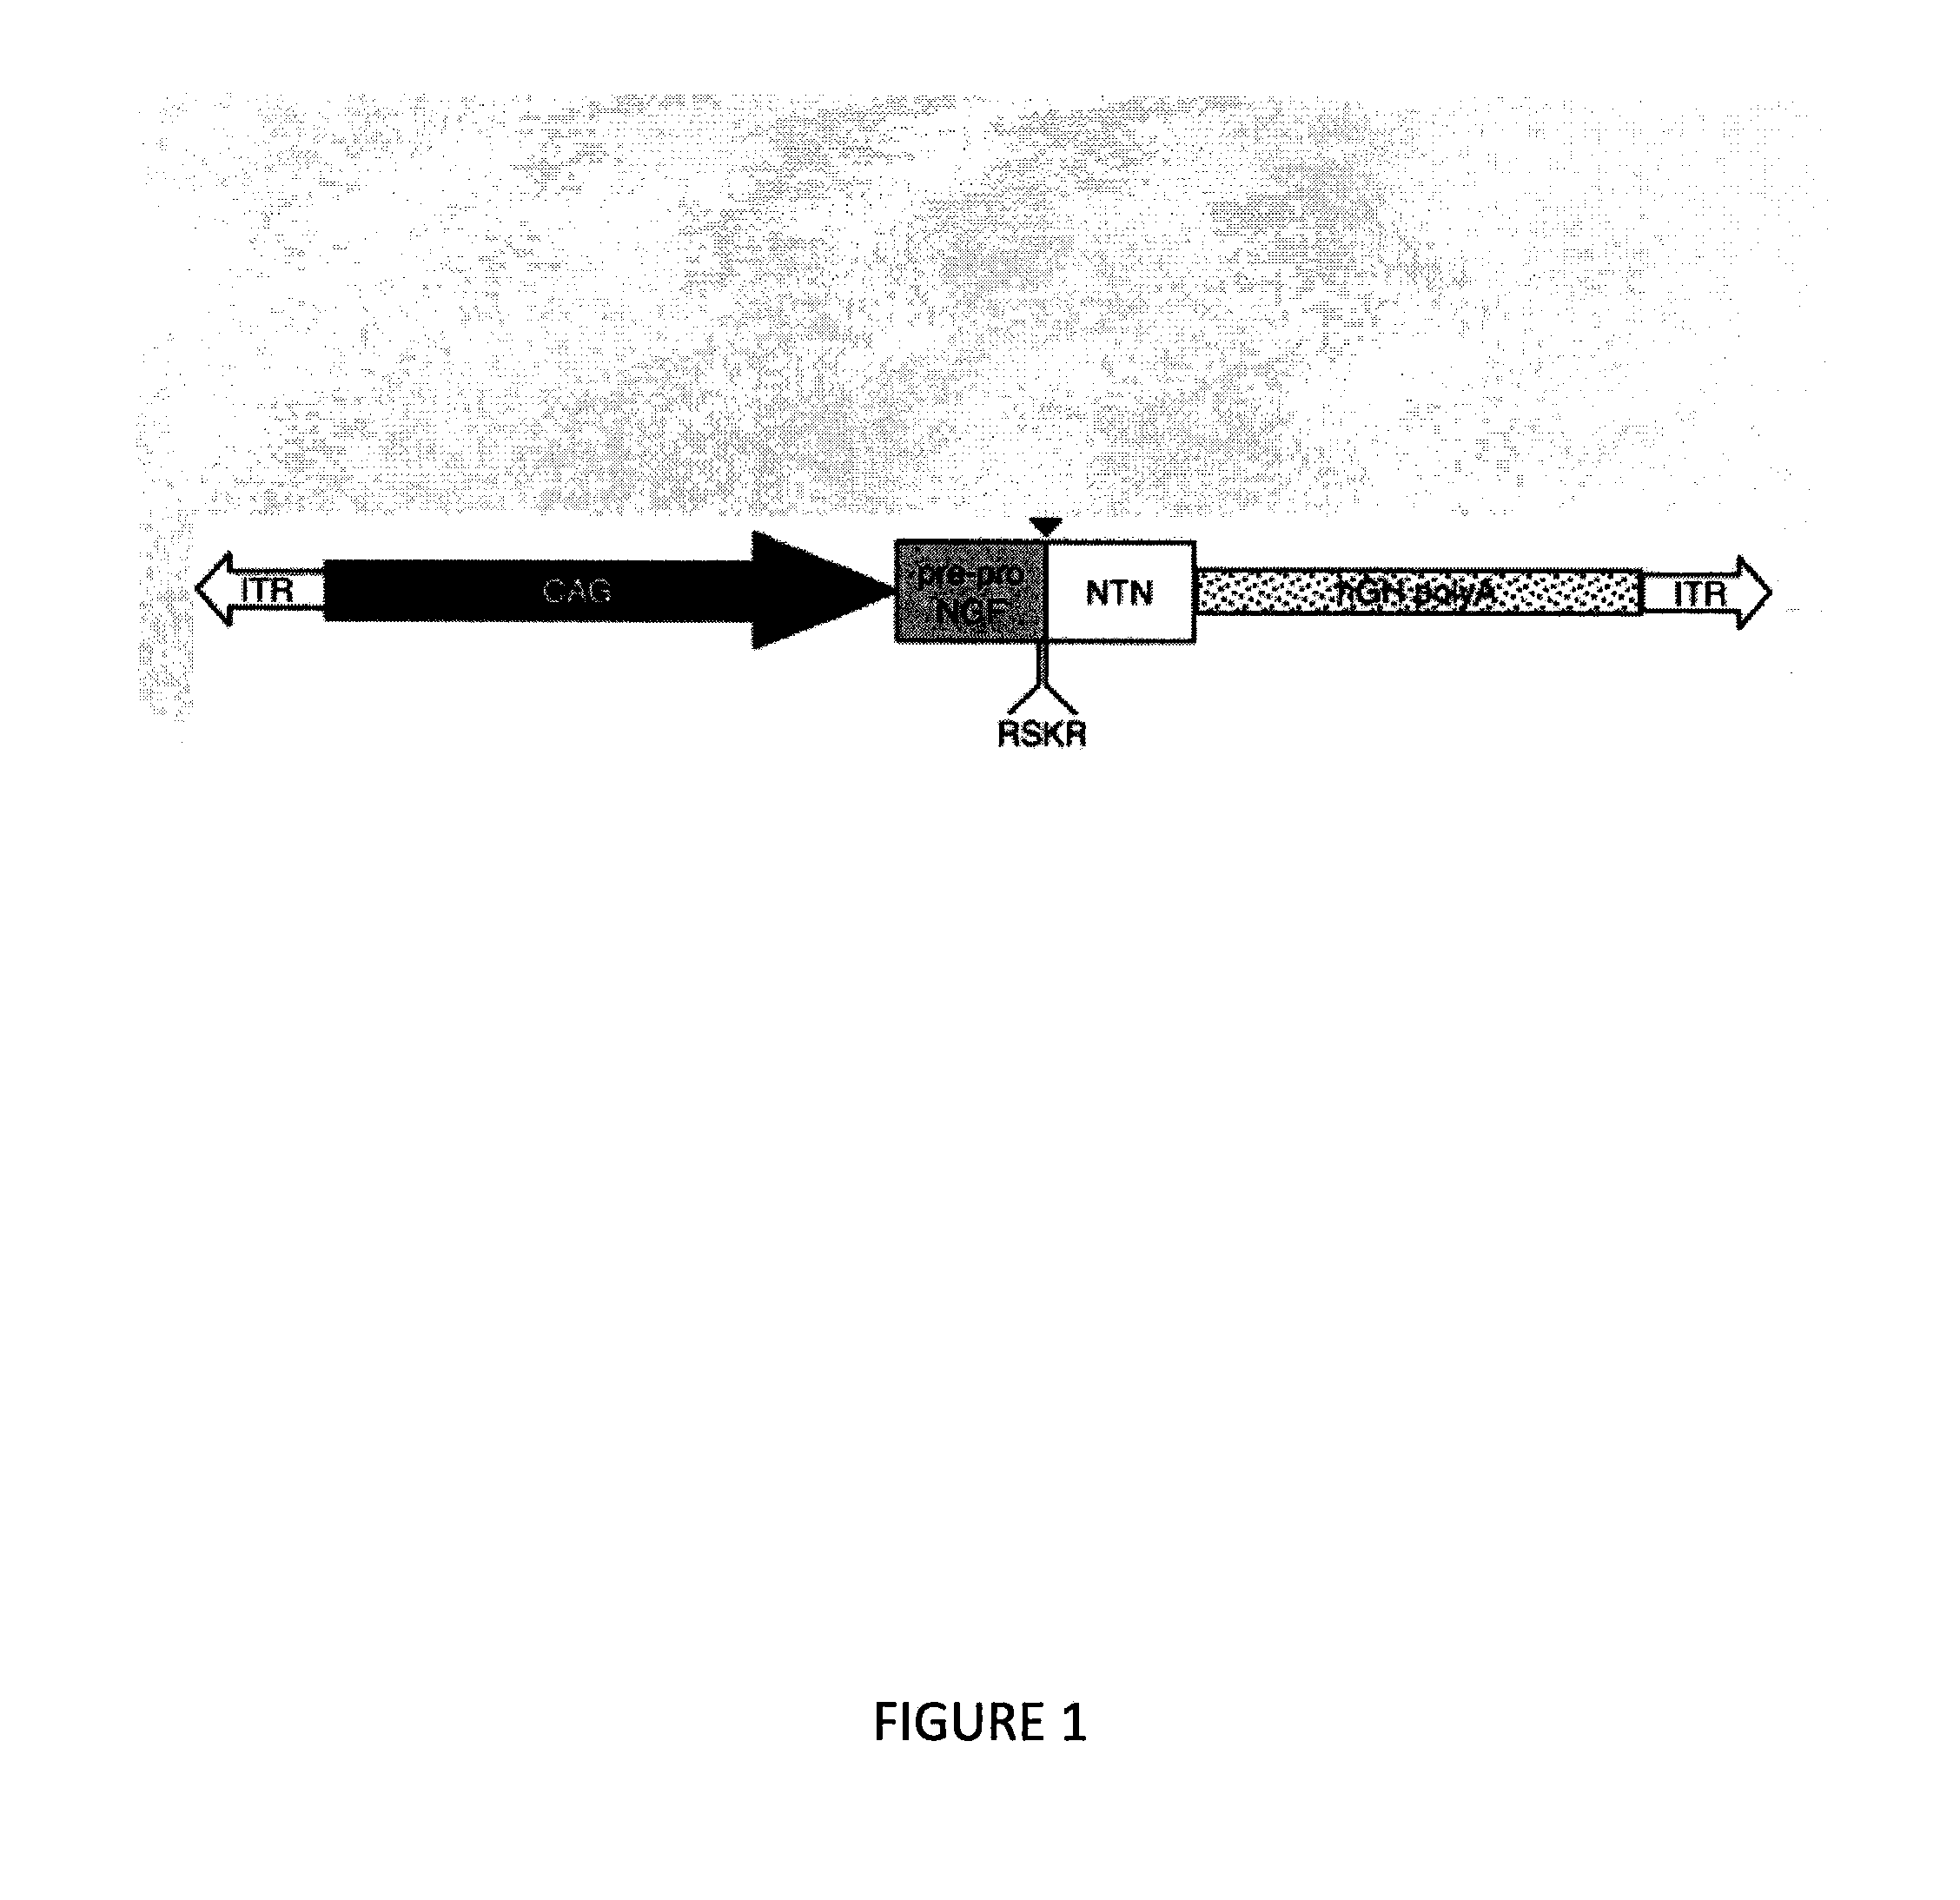 Methods for treating parkinson's disease and other disorders of dopaminergic neurons of the brain